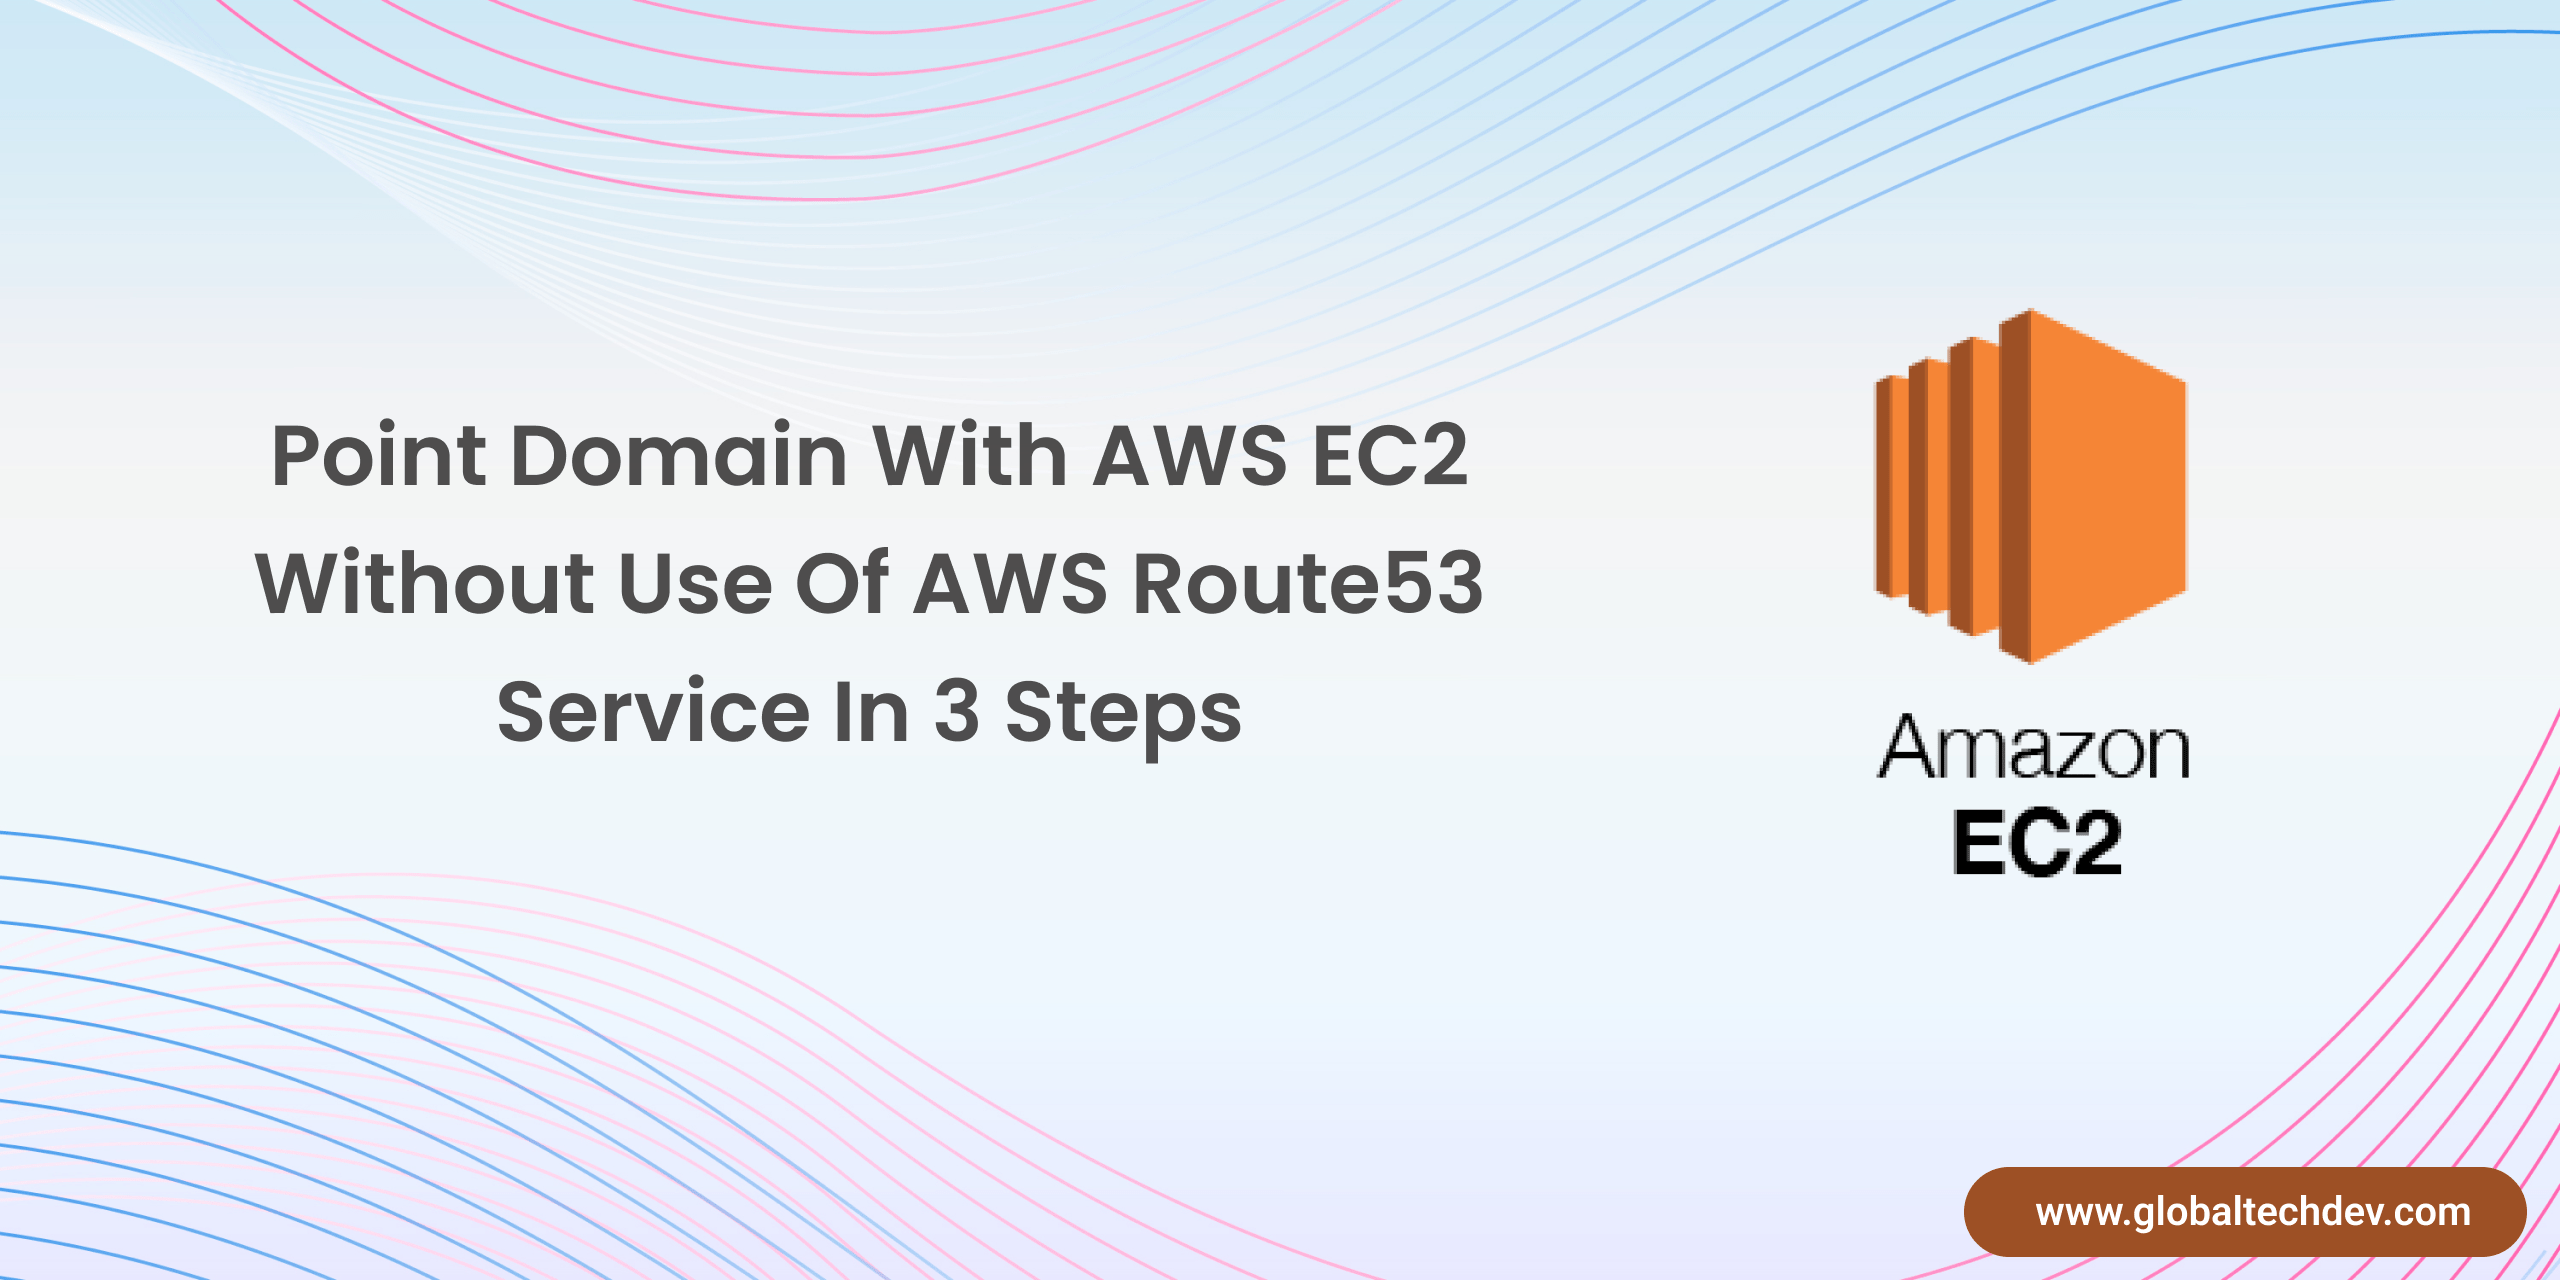 Point Domain With AWS EC2 Without Use Of AWS Route53 Service In 3 Steps